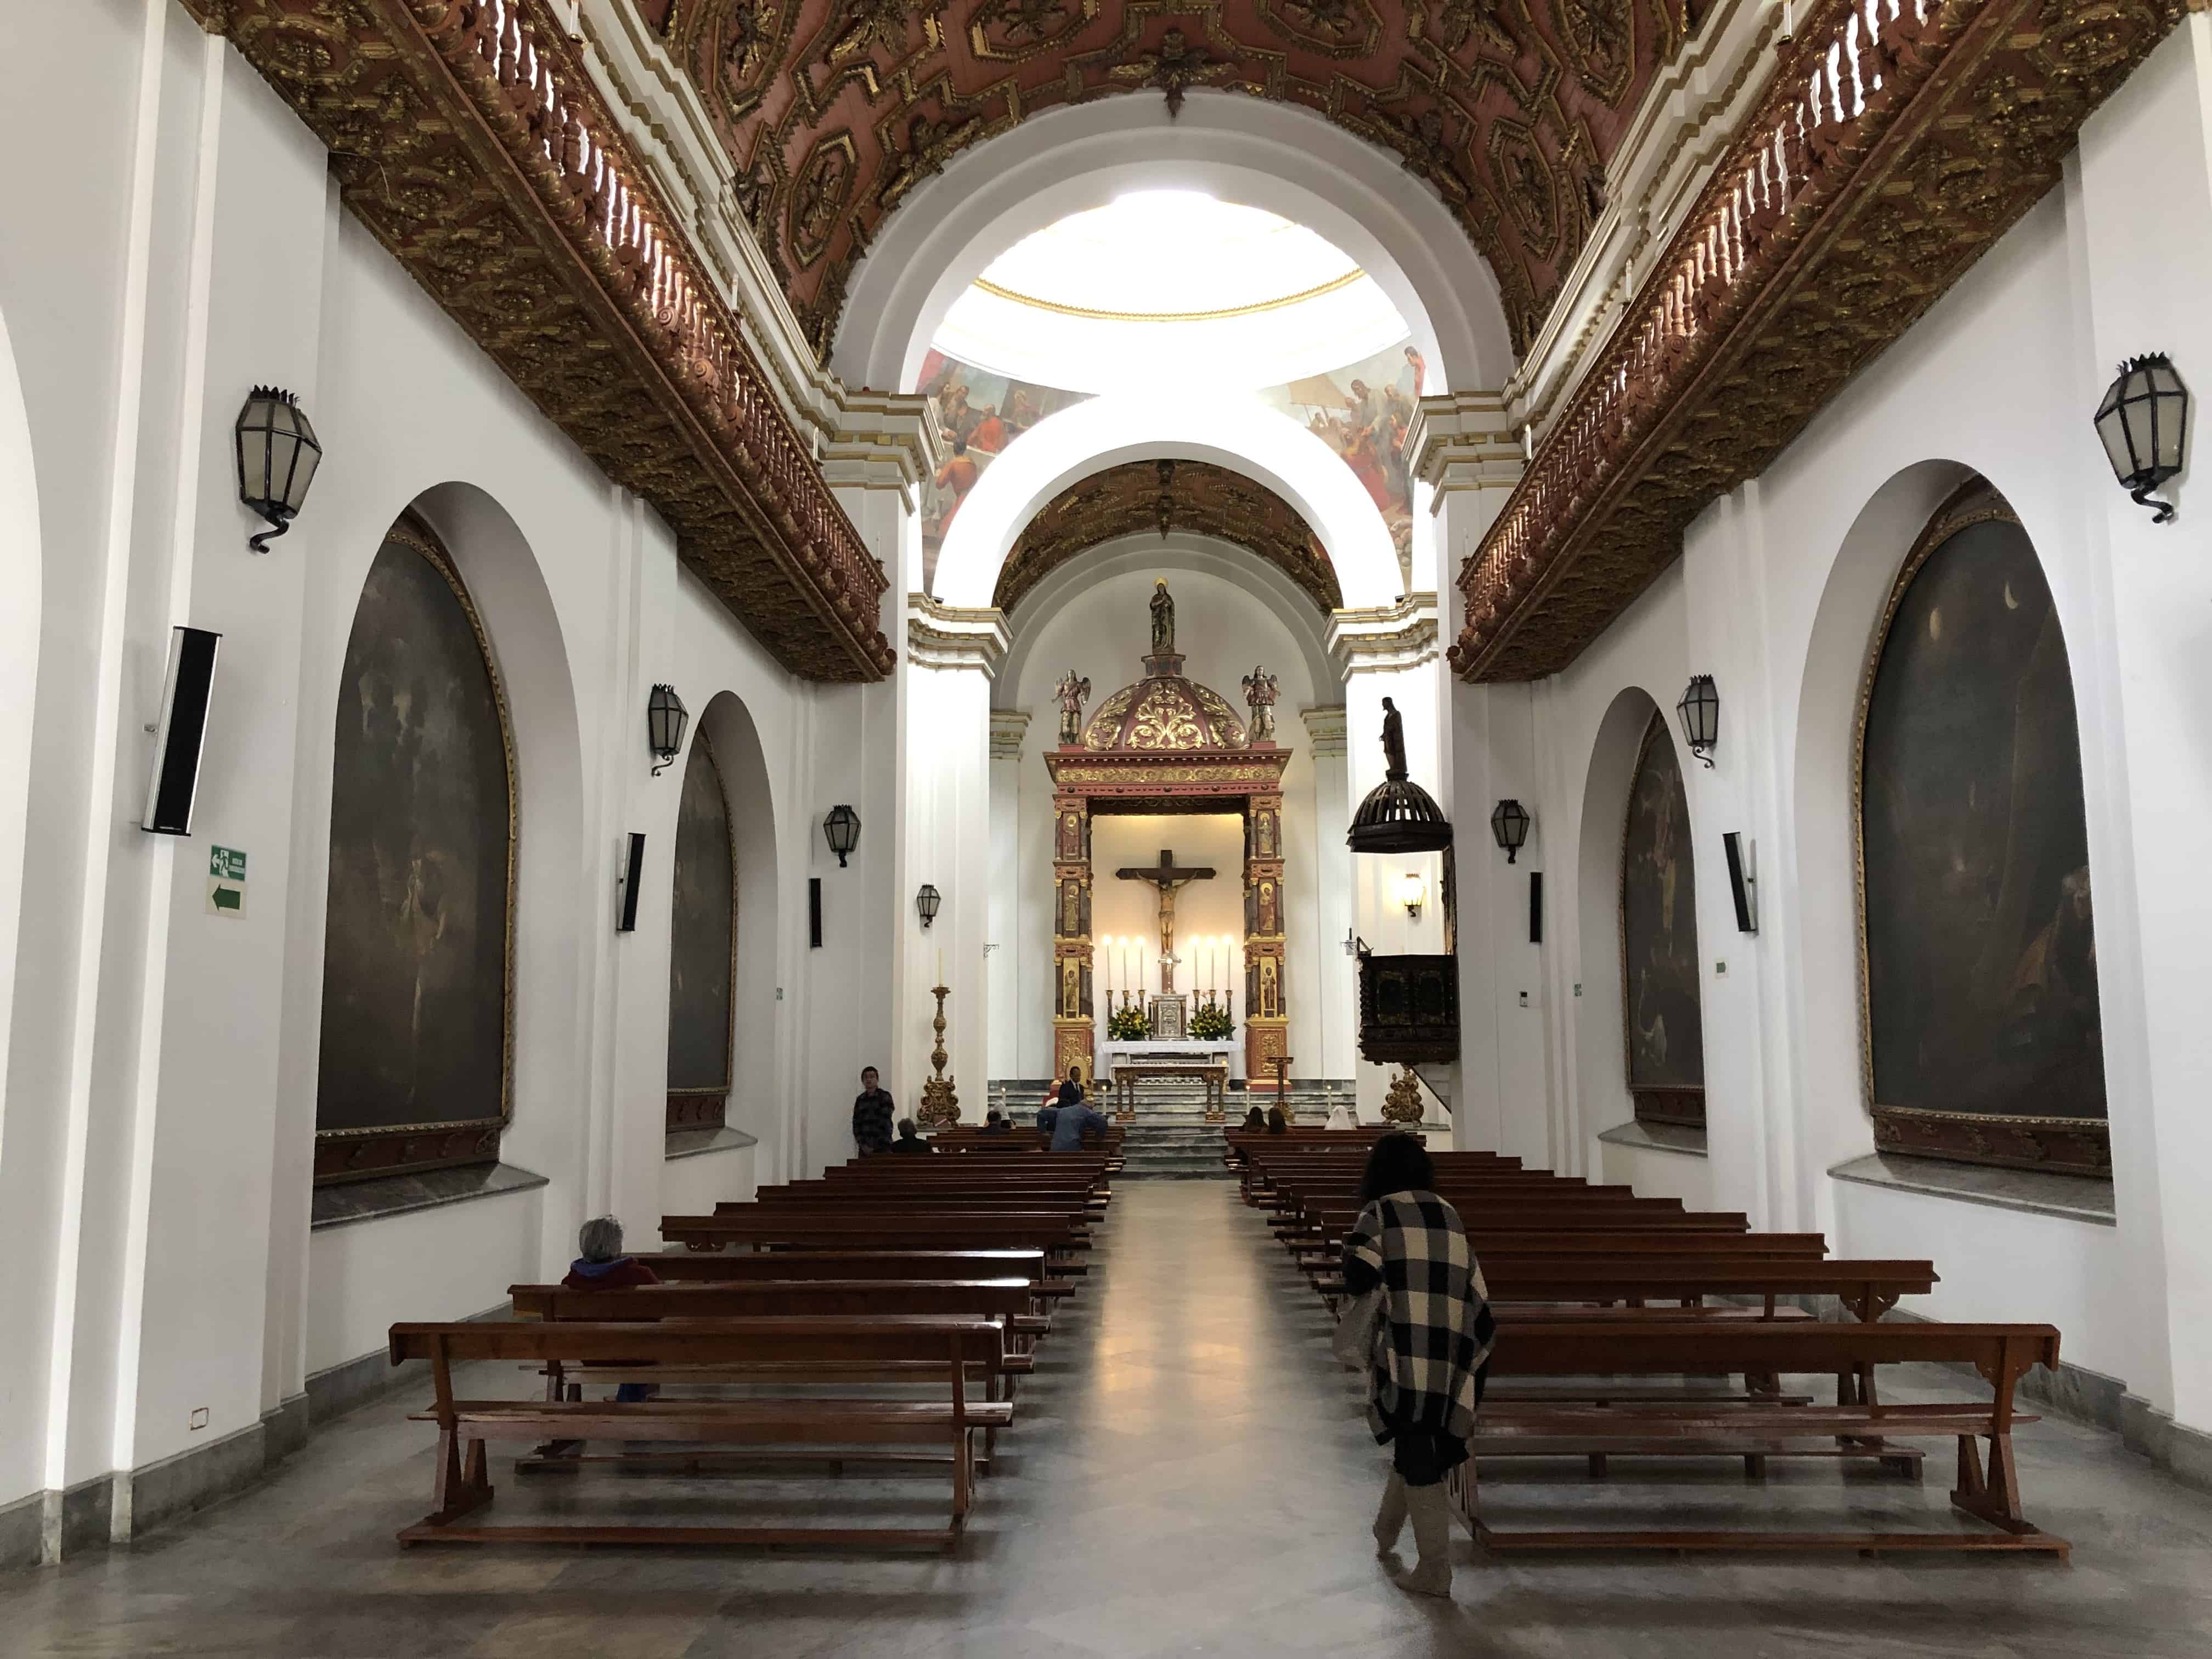 Chapel of the Tabernacle in La Candelaria, Bogotá, Colombia